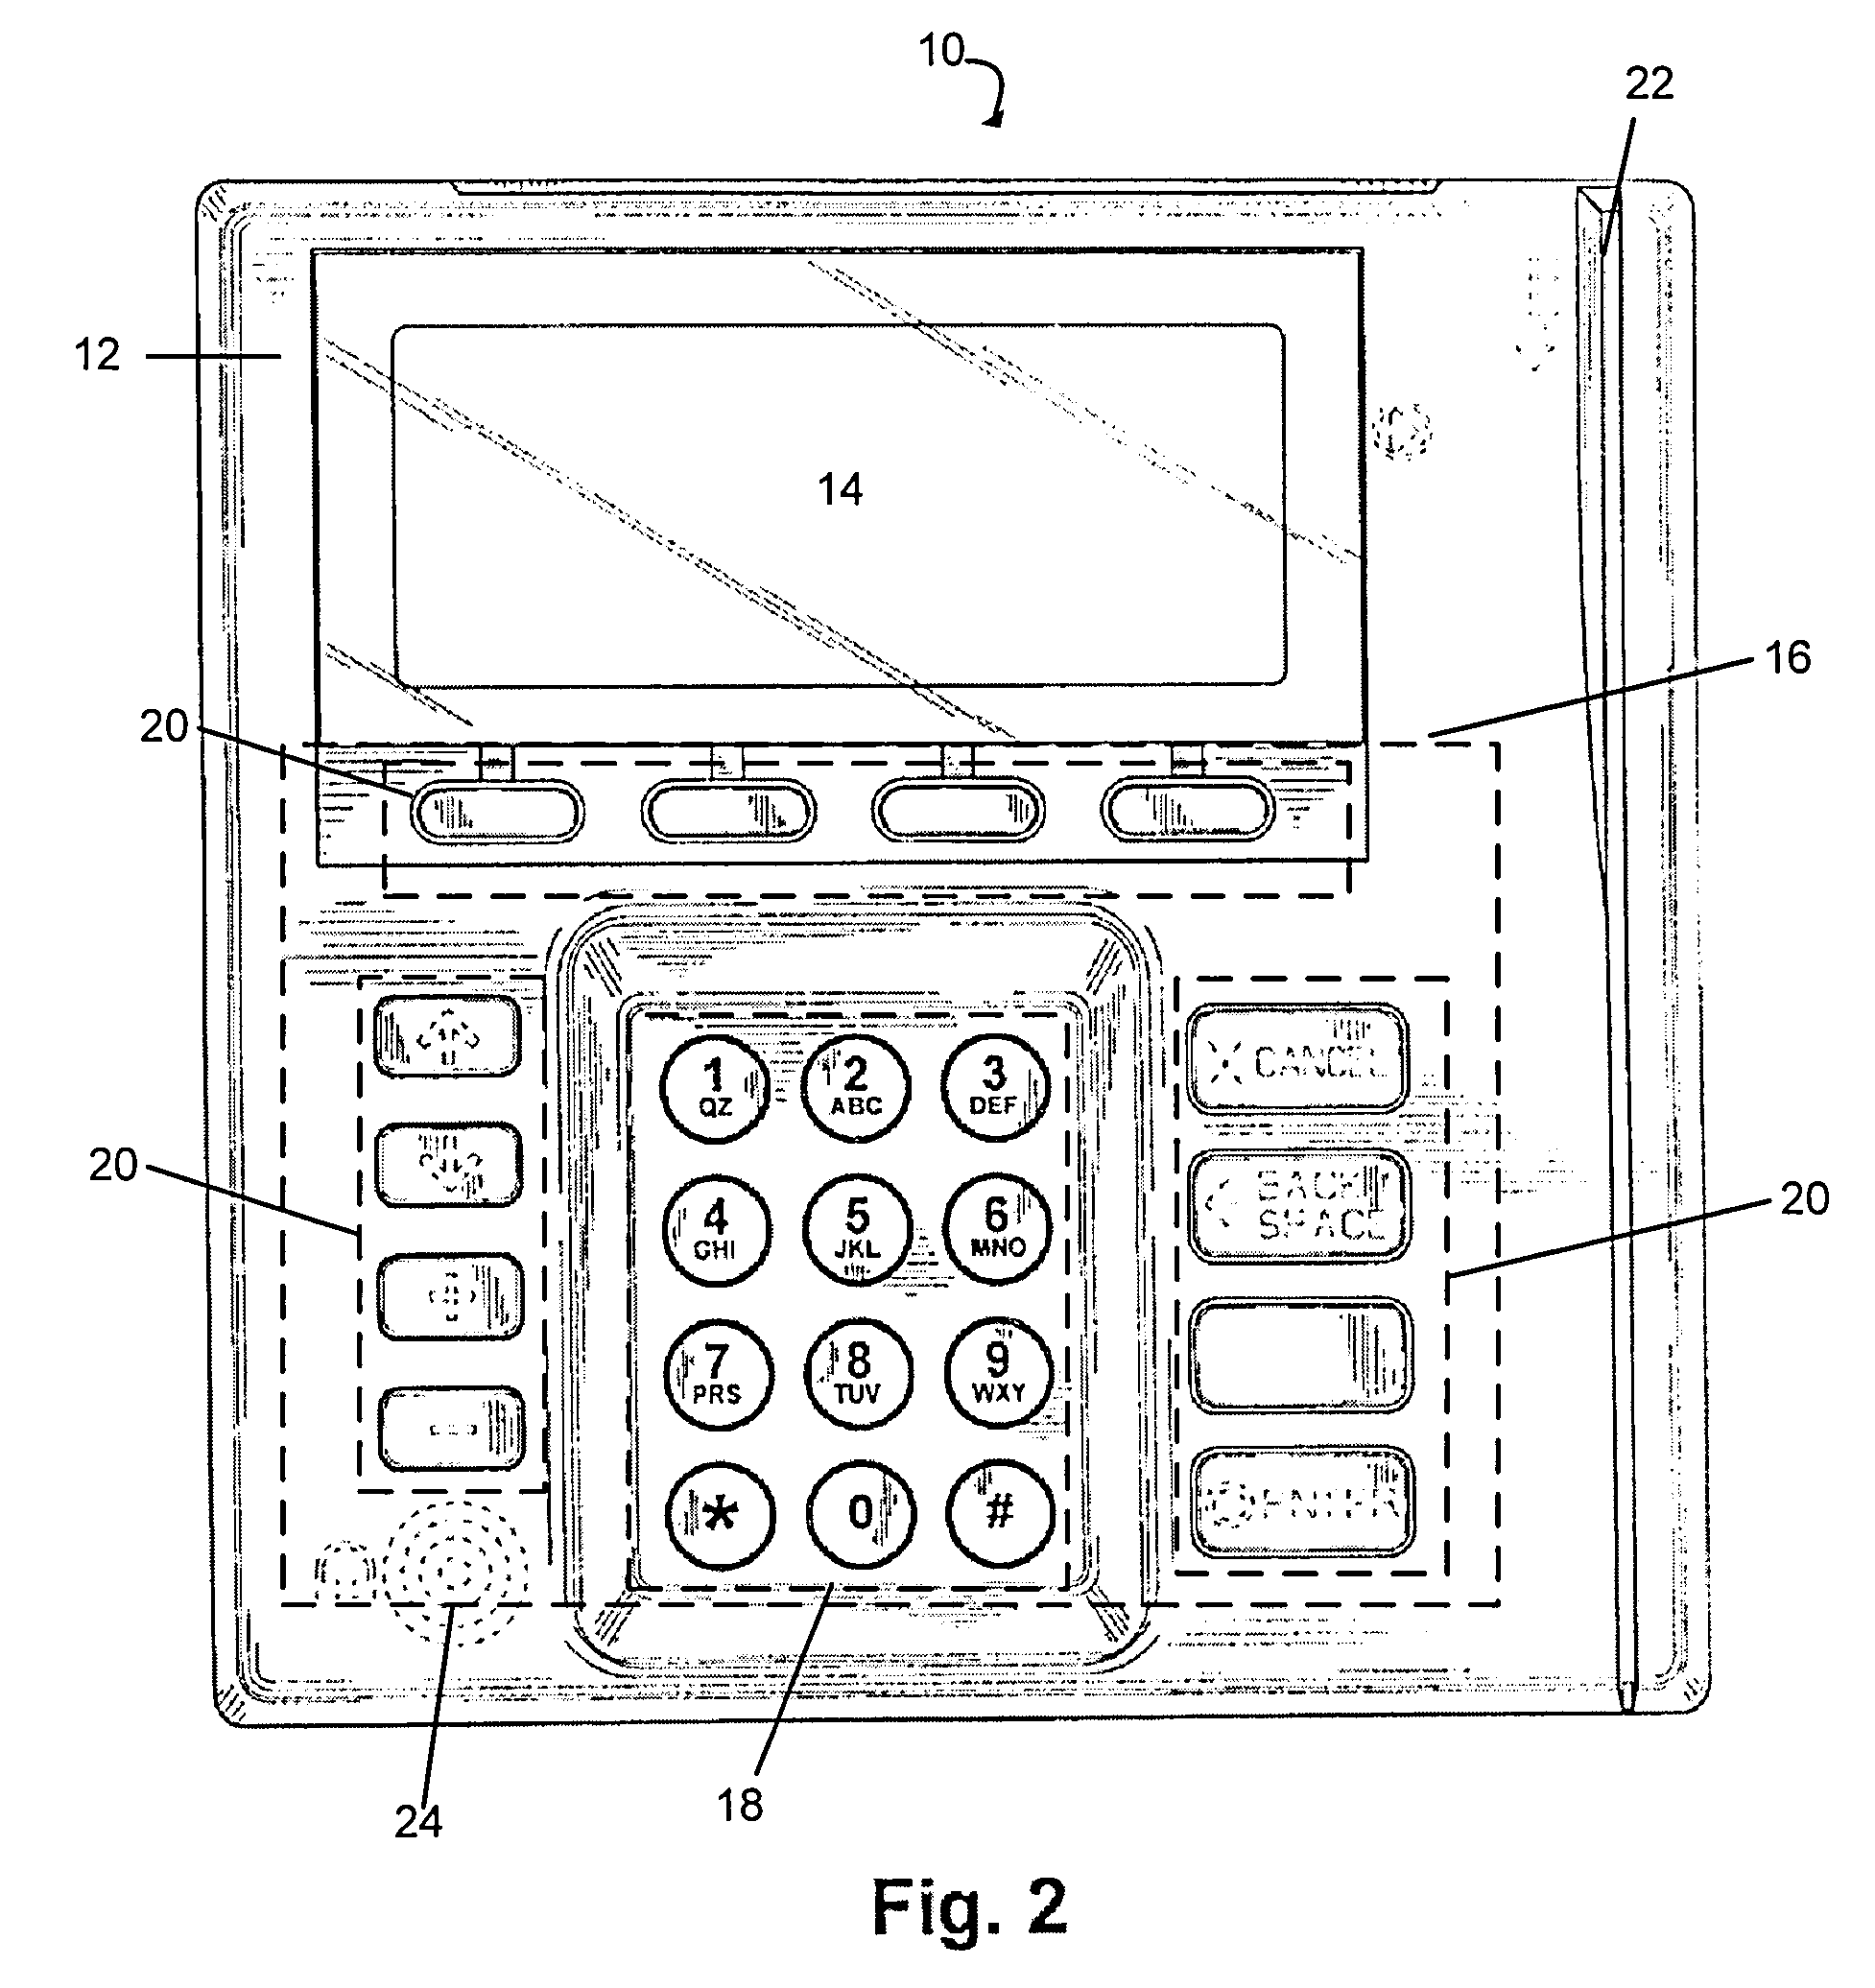 Central processing unit and encrypted pin pad for automated teller machines